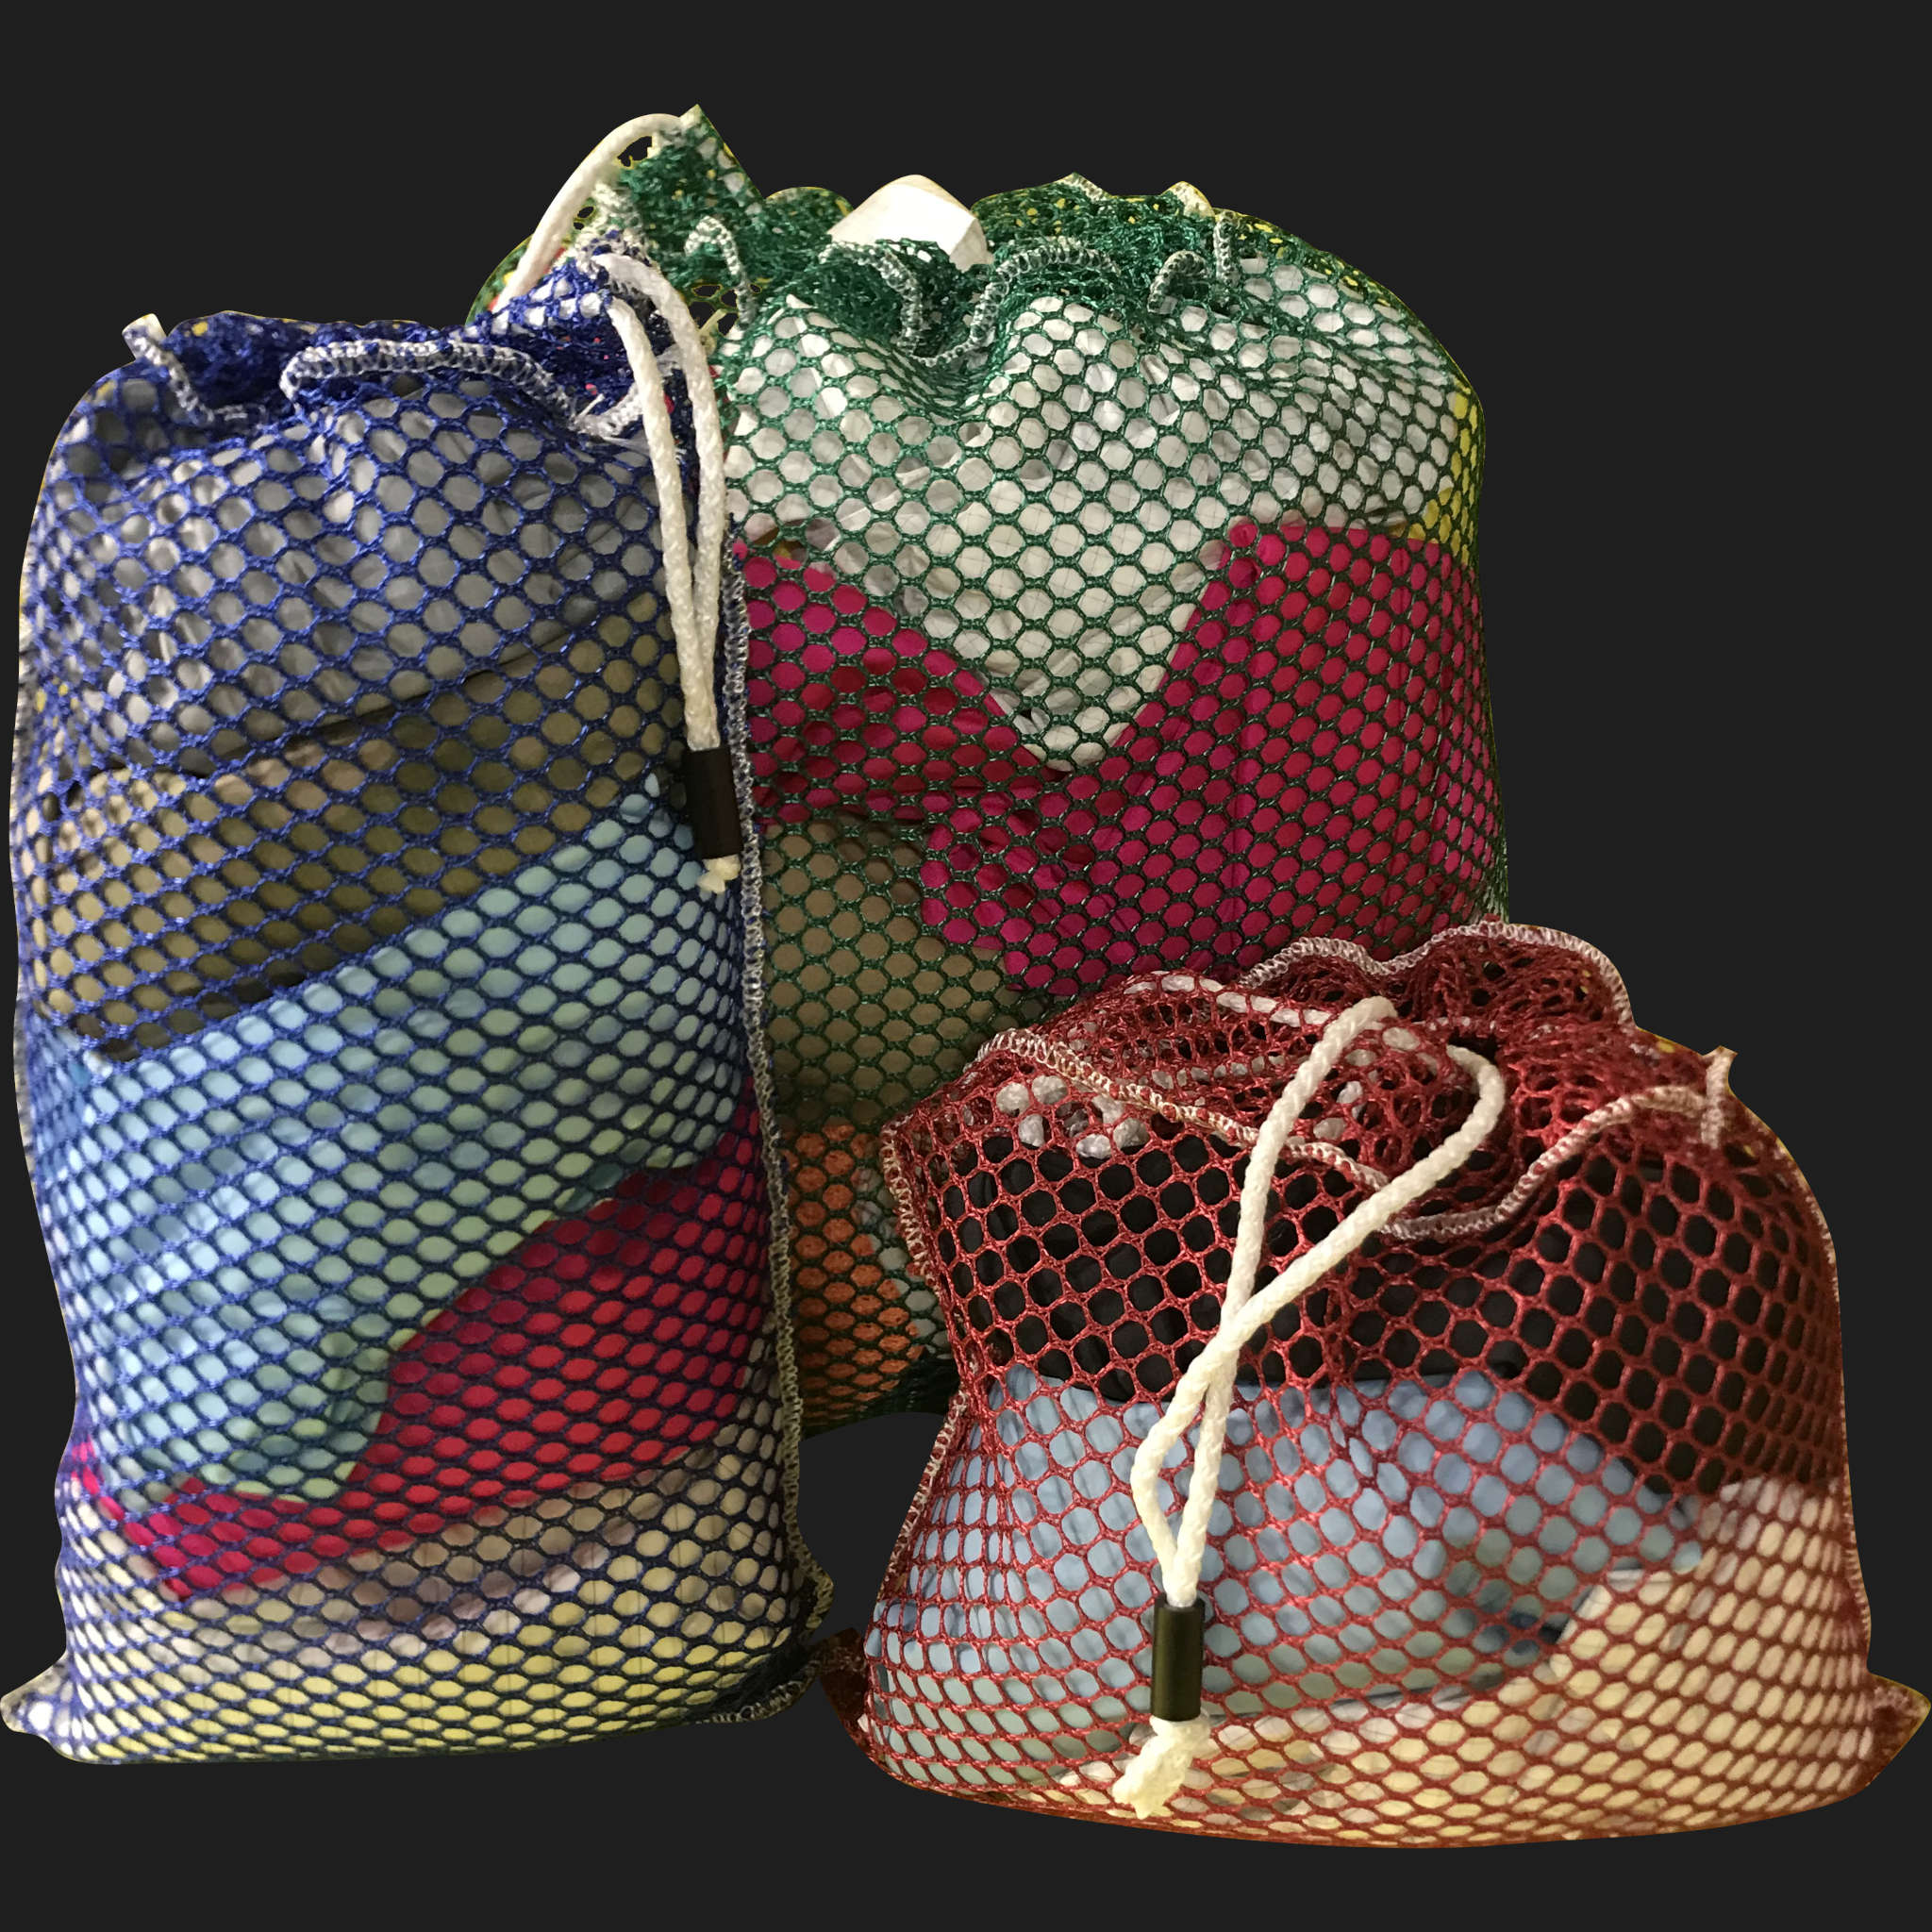 34" x 38" Customized Mesh-Net-Laundry Bags Heavy Duty with Cord and barrellock closure